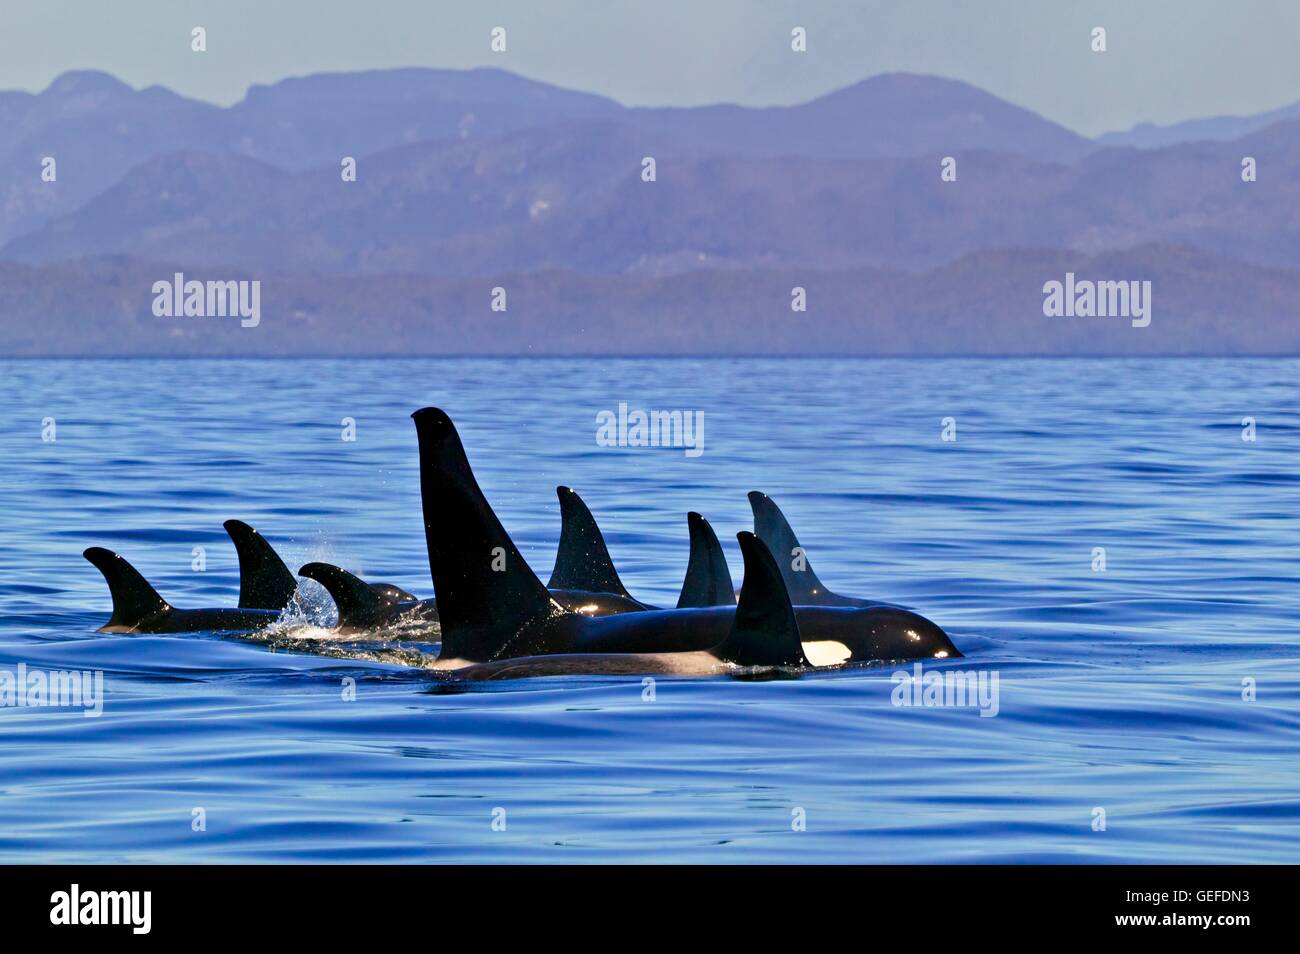 Zoology / animals, mammal / mammalian, Family pod of northern resident fish eating orca whales (killer whales, Orcinus orca) resting in a resting line in Queen Charlotte Strait with the British Columbia Coast Mountains in the background, on a clear blue s Stock Photo